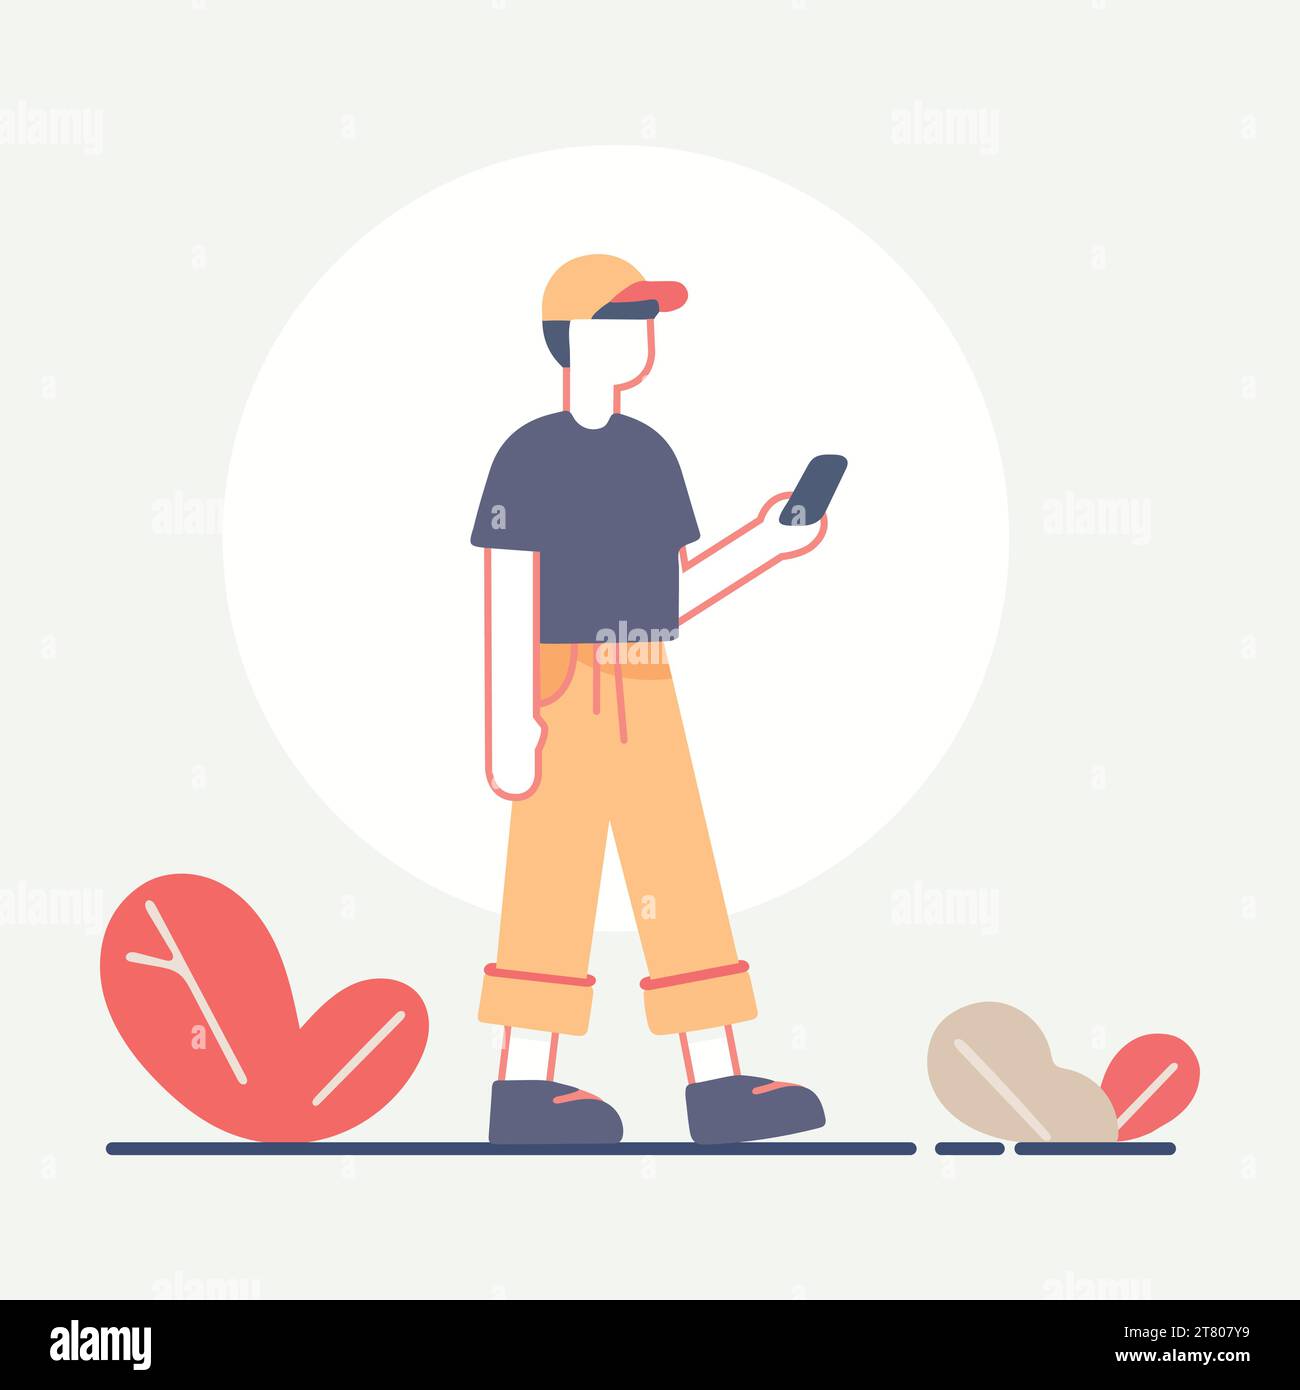 abstract modern young man person walking and checking smart mobile phone device in hand wearing cap, guy on phone, man shopping online on the go, look Stock Vector